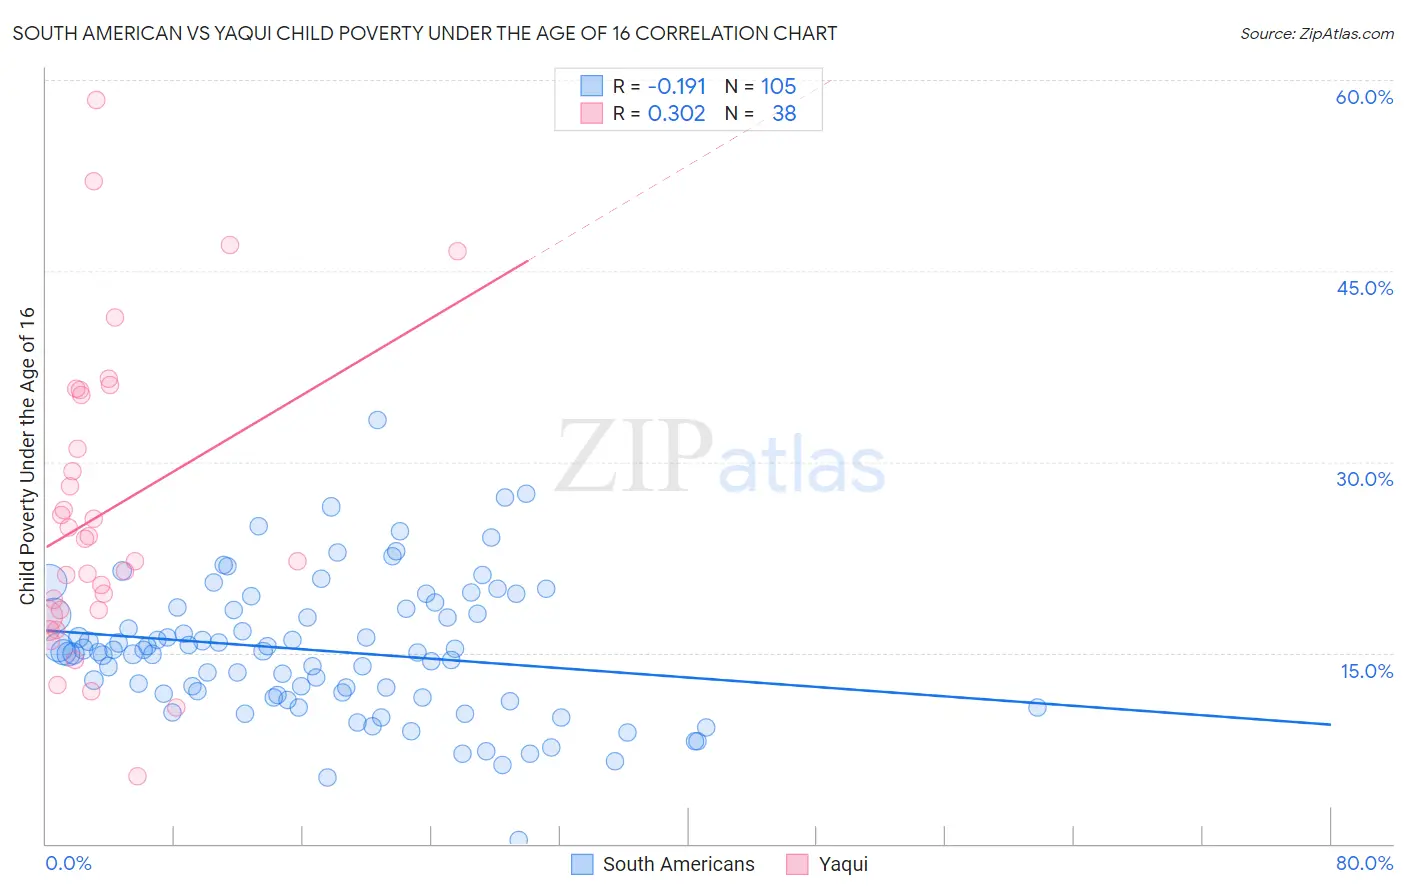 South American vs Yaqui Child Poverty Under the Age of 16